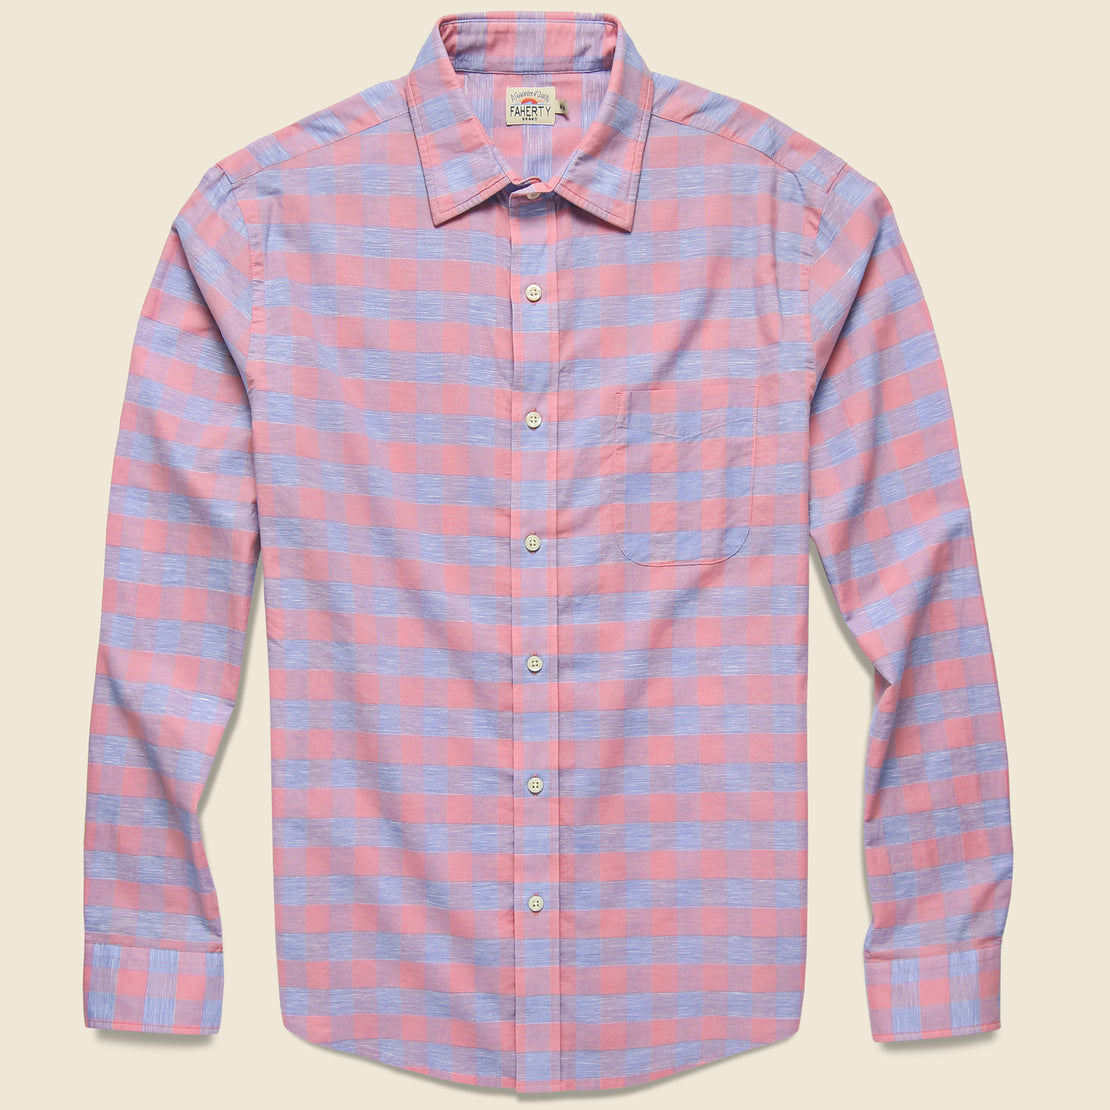 Faherty Faherty - L/S Stretch Summer Blend Shirt, SS19